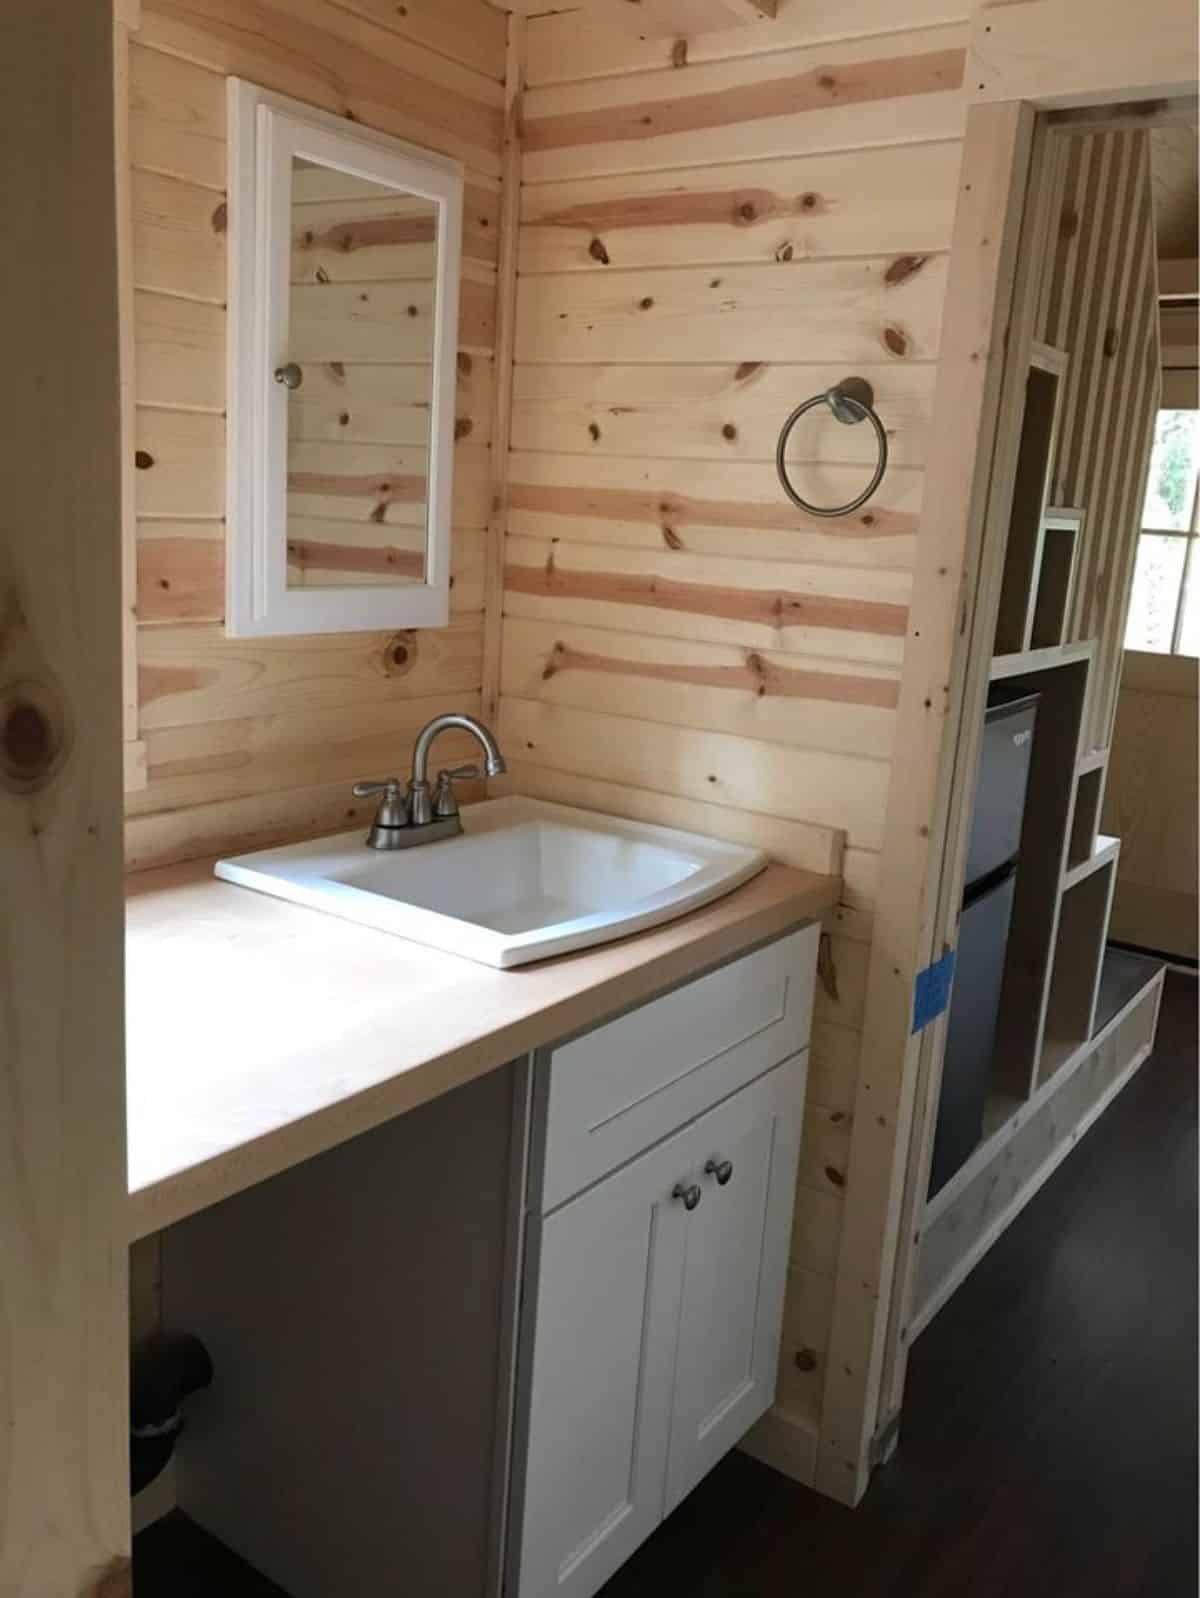 bathroom of rustic cabin house has all the standard fittings